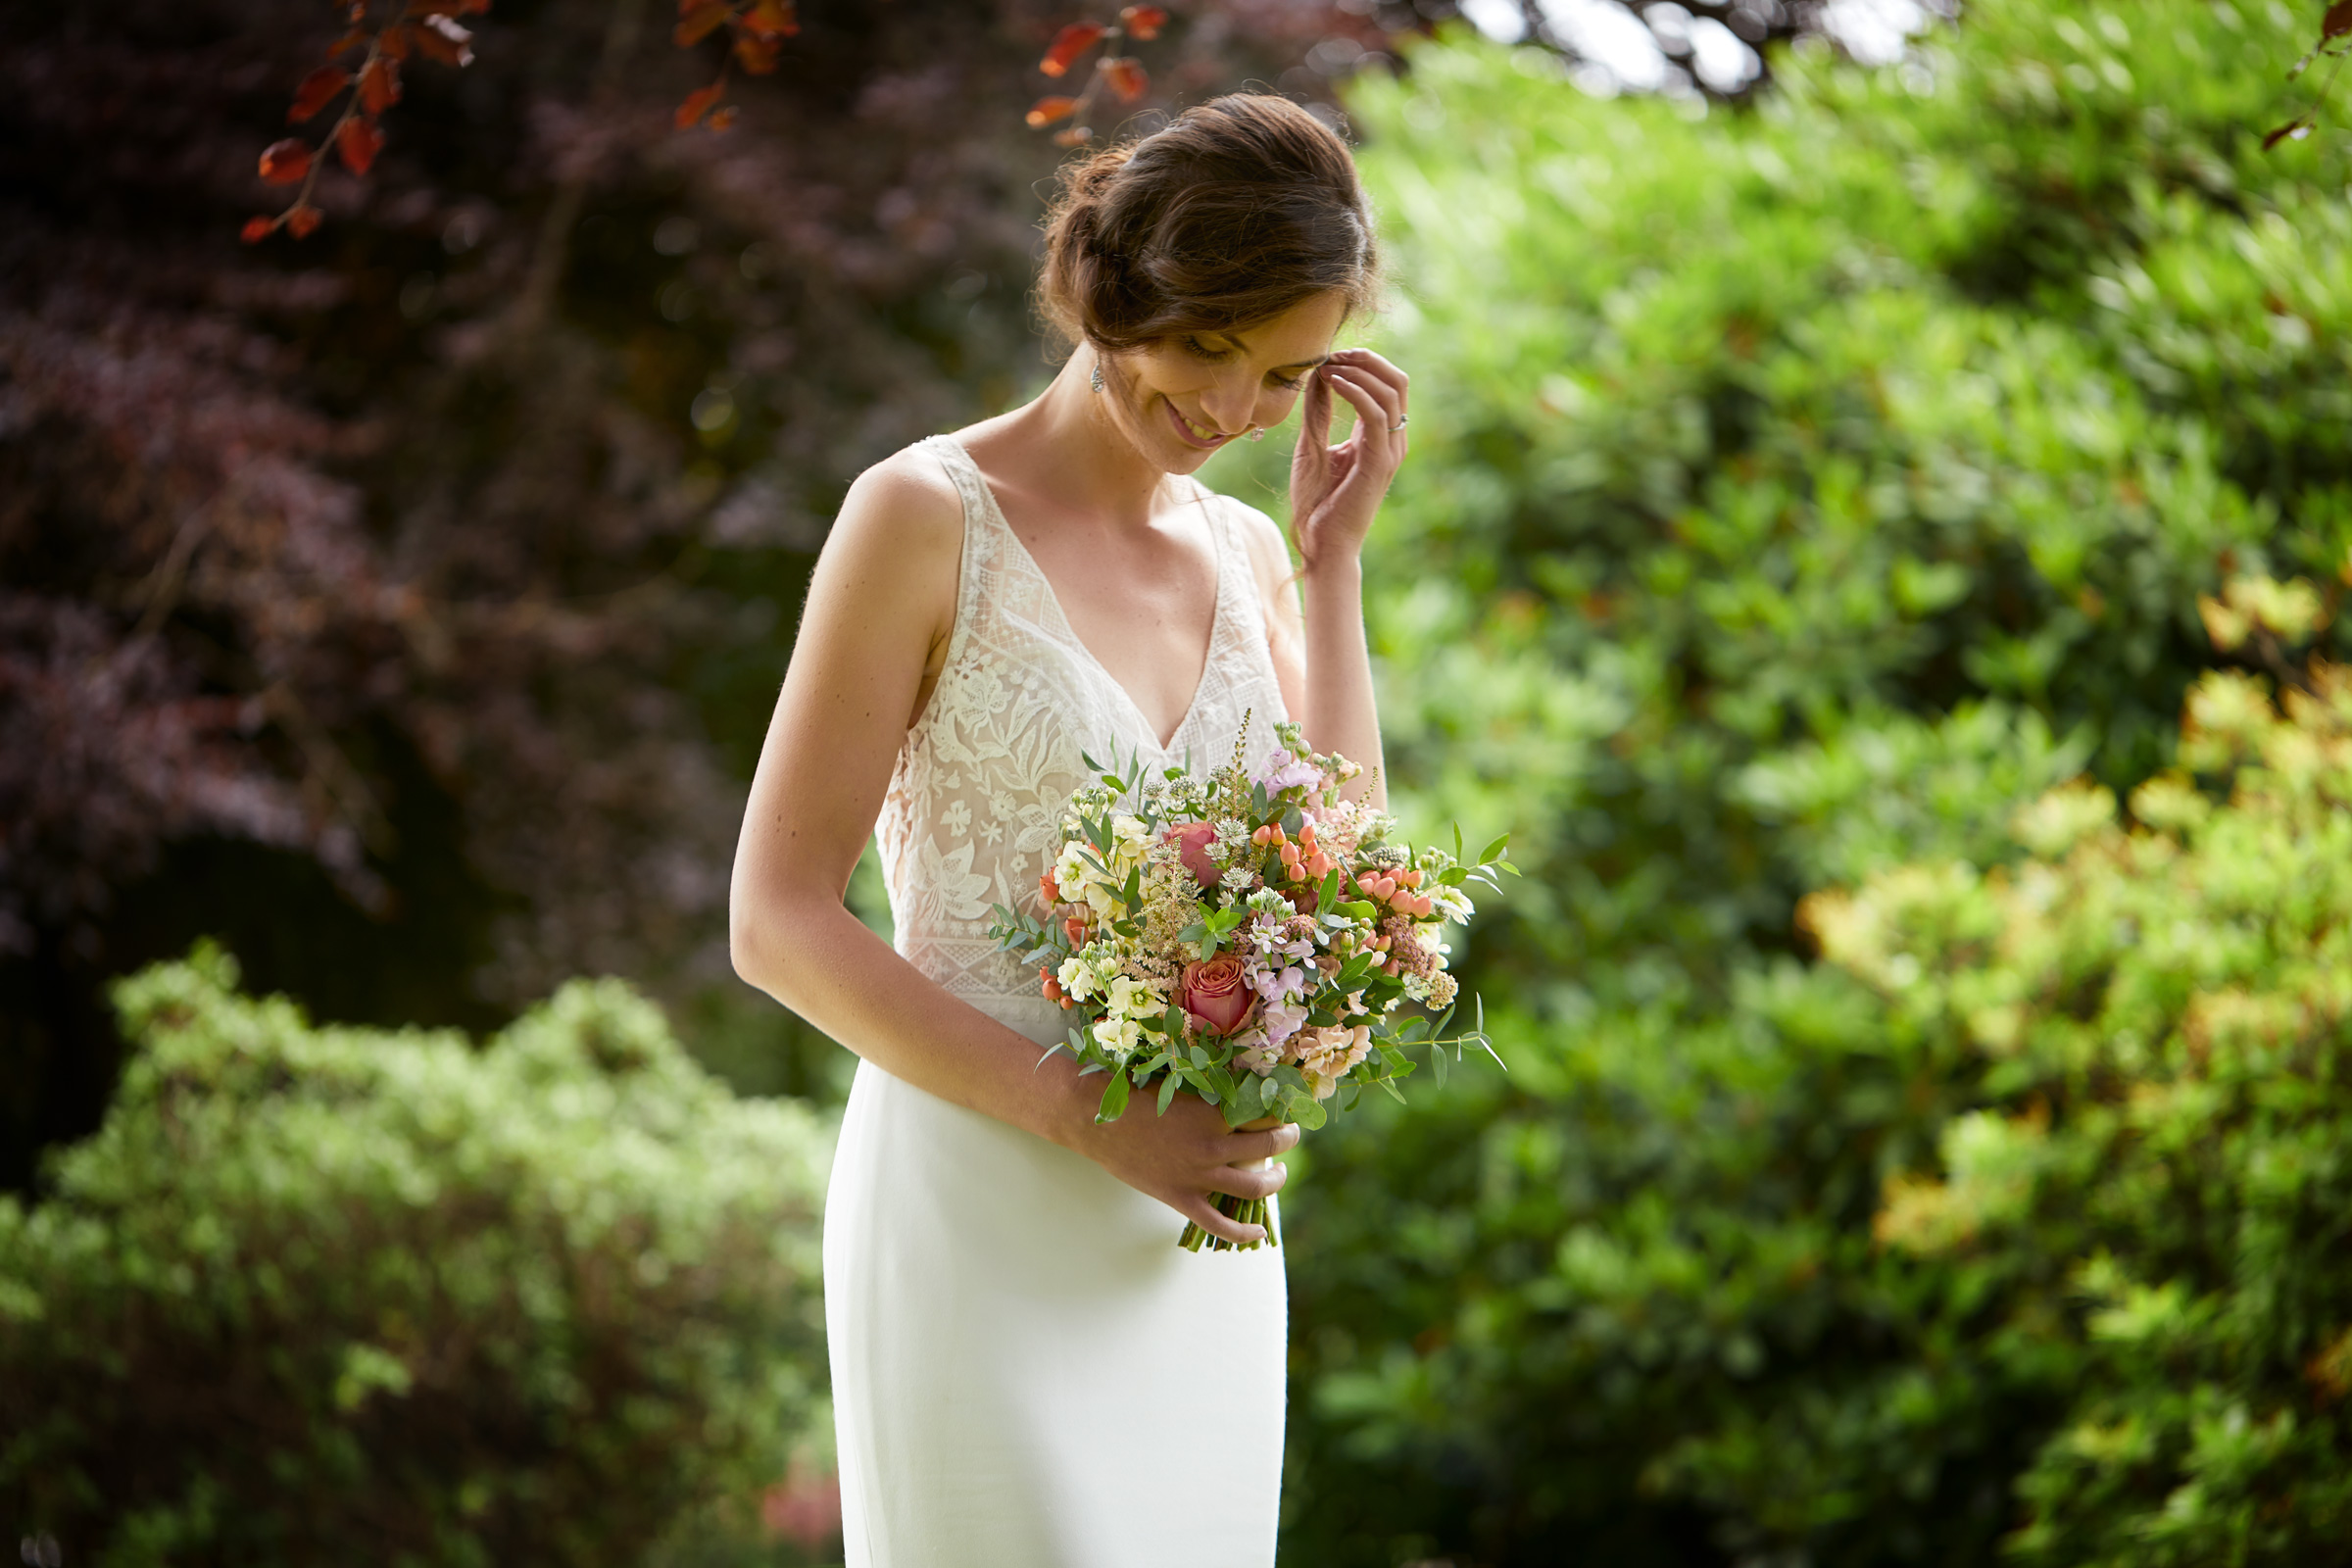 Bride in the Garden at Houston House Hotel. Lifestyle photographer Alastair Ferrier for Macdonald Hotels.